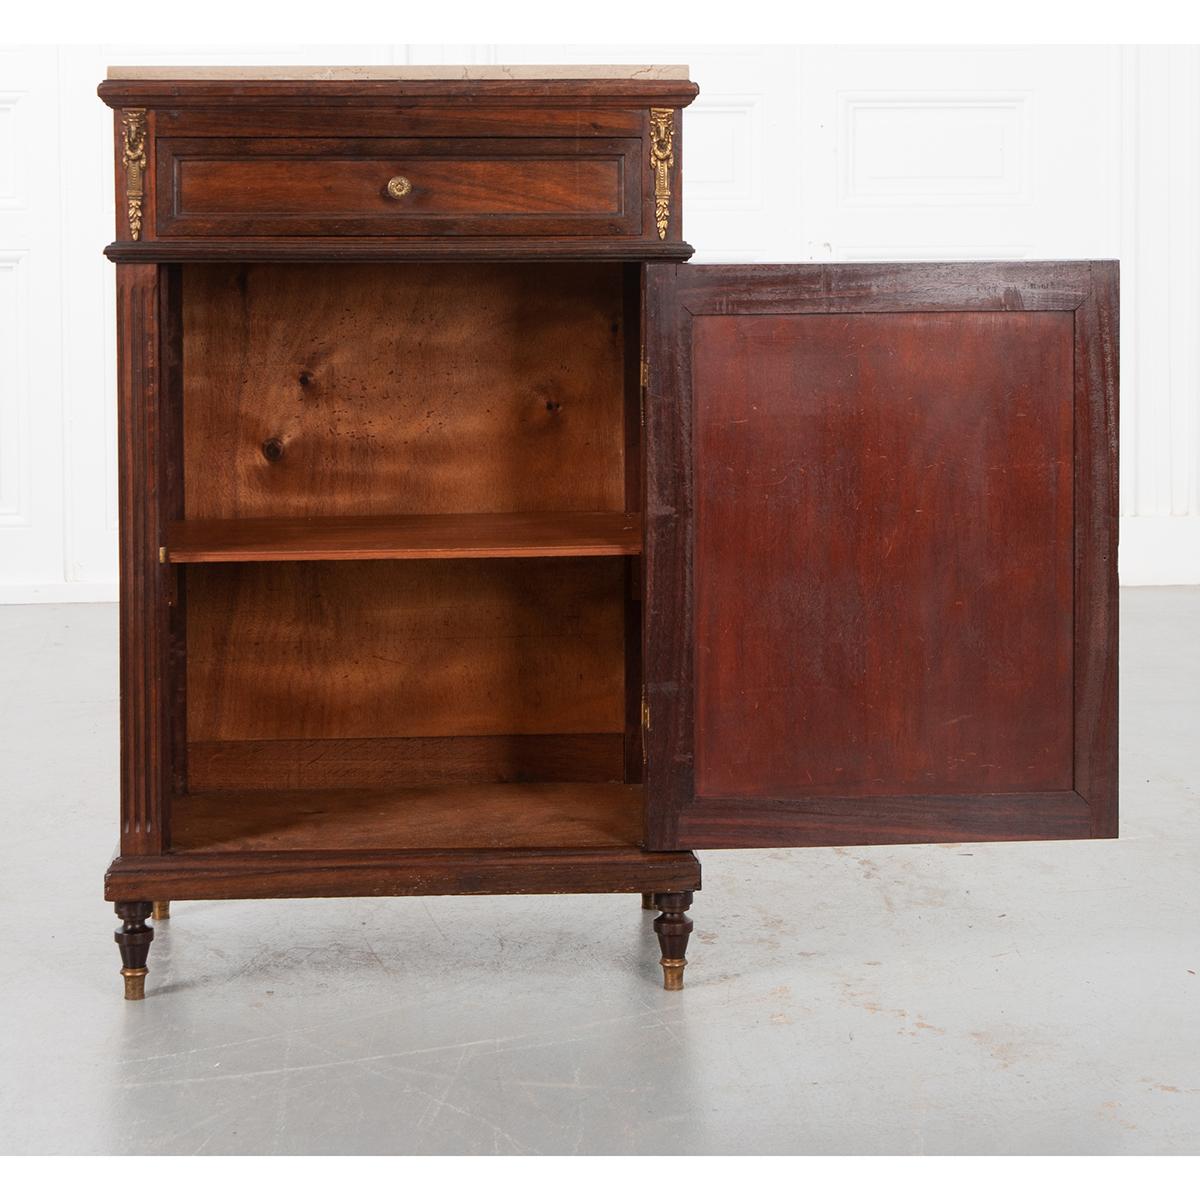 A specialized cabinet made for keeping jams, jellies and marmalades, this 19th century French Louis XVI- style confiturier is ideally sized to meet a number of storage needs. The marble top sits on a multi-wood piece with one drawer and one door. It